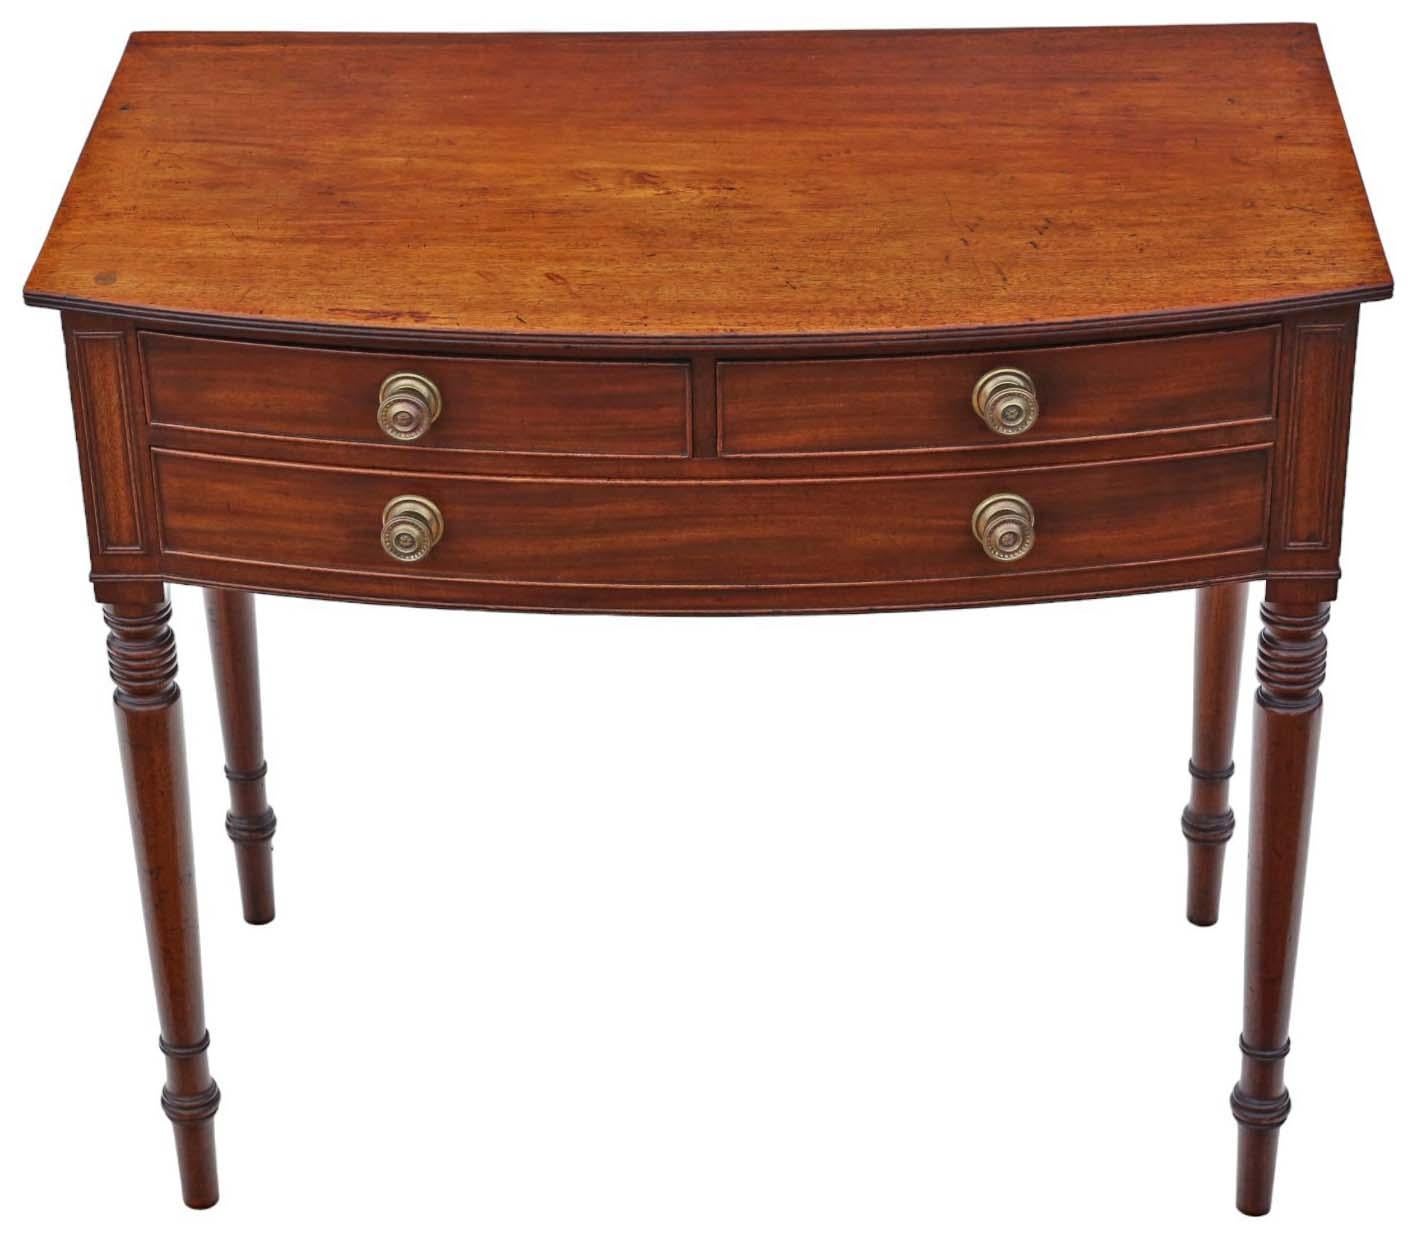 Introducing an Antique Fine Quality 19th Century Georgian Mahogany Writing Table, which also serves as a desk, dressing lamp, or large bedside table, showcasing a classical Georgian design.

Recently restored, the finishes of this exceptional piece